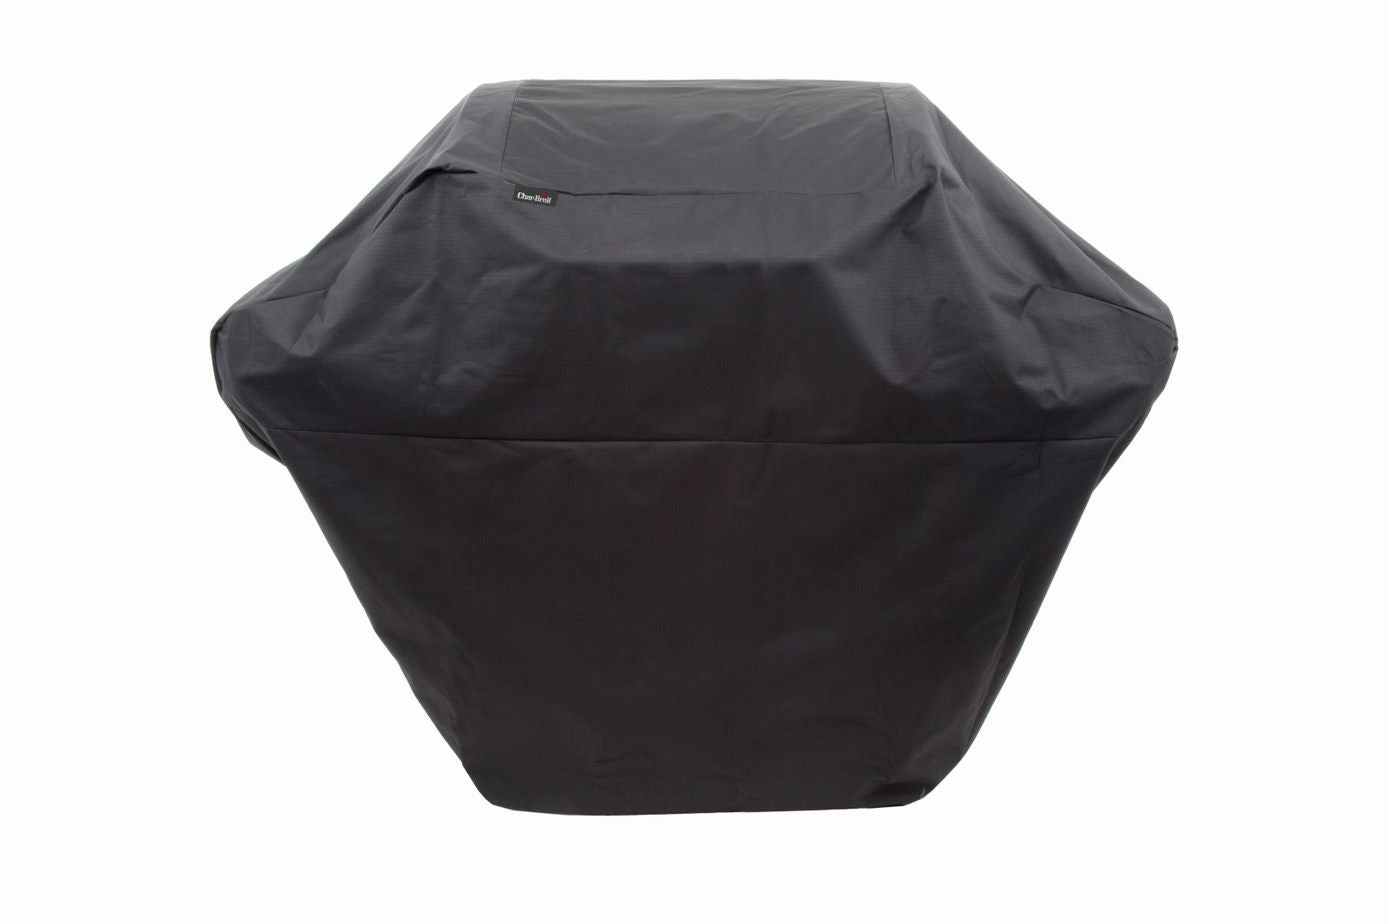 Char-Broil Rip-Stop Grill Cover - 2-3 Burner